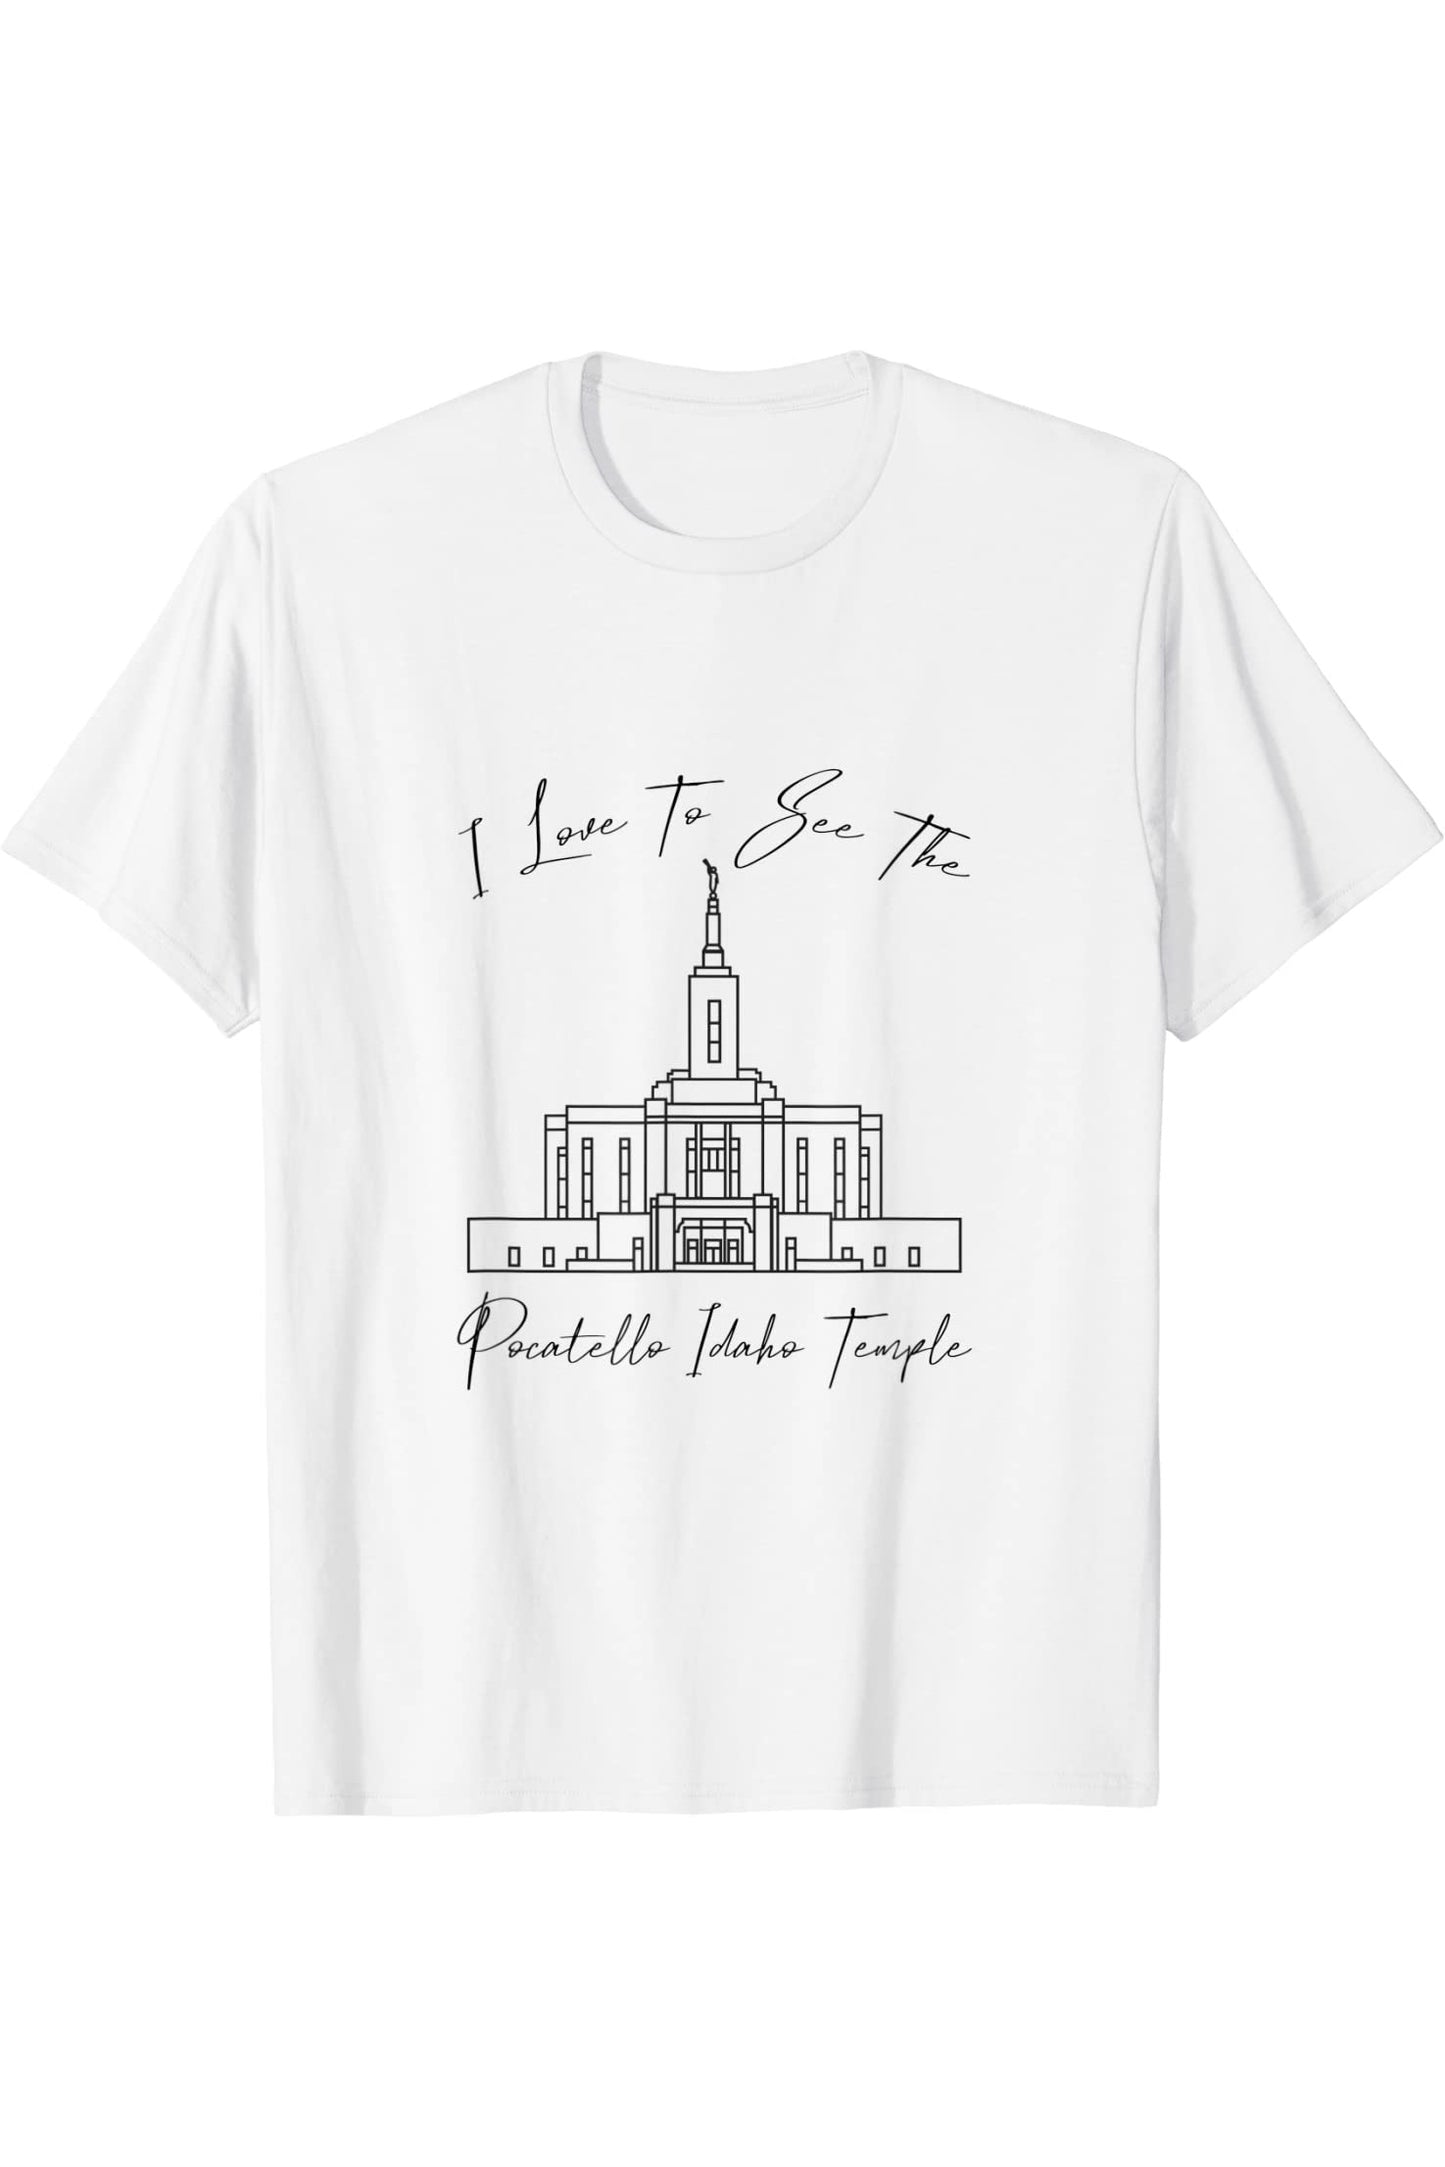 Pocatello ID Temple, I love to see my temple, calligraphie T-Shirt